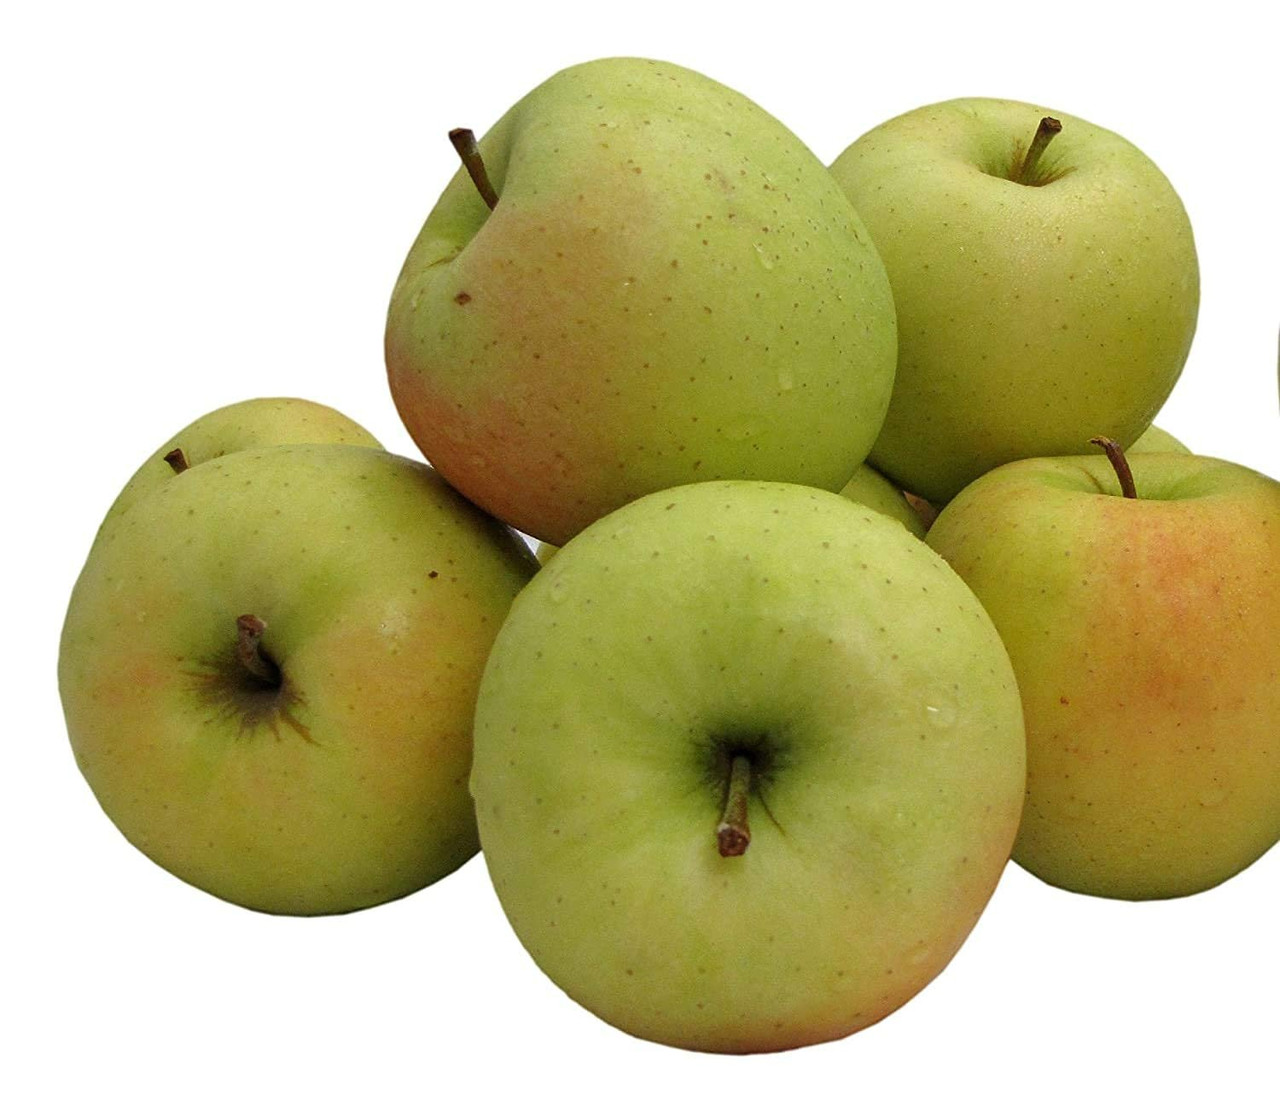 What Are Golden Delicious Apples: Information About Golden